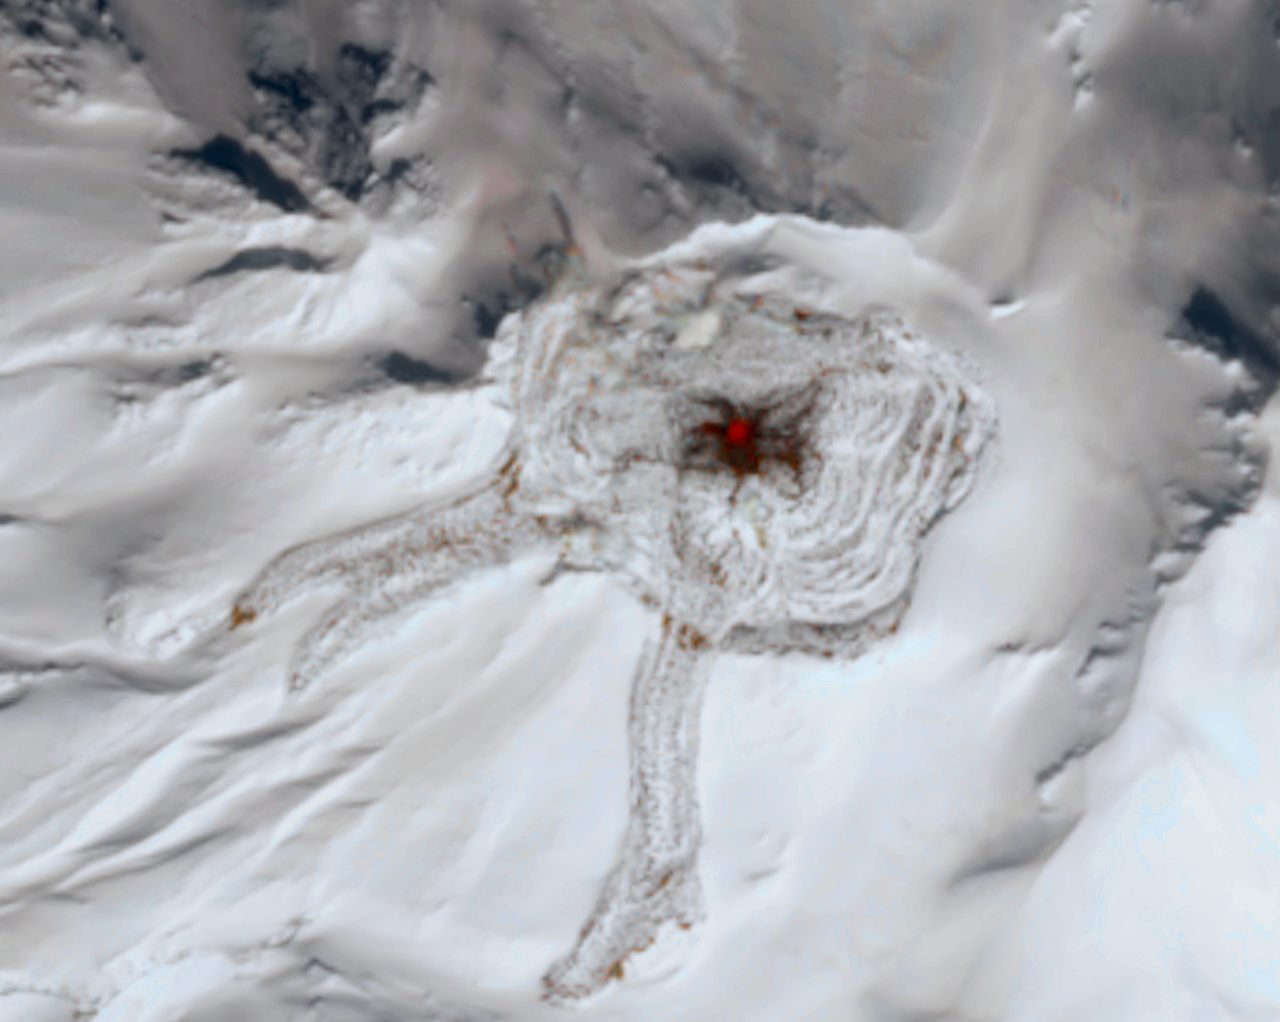 Alaska's Great Sitkin volcano, shown here in a satellite image from April 8, has been erupting for several months.